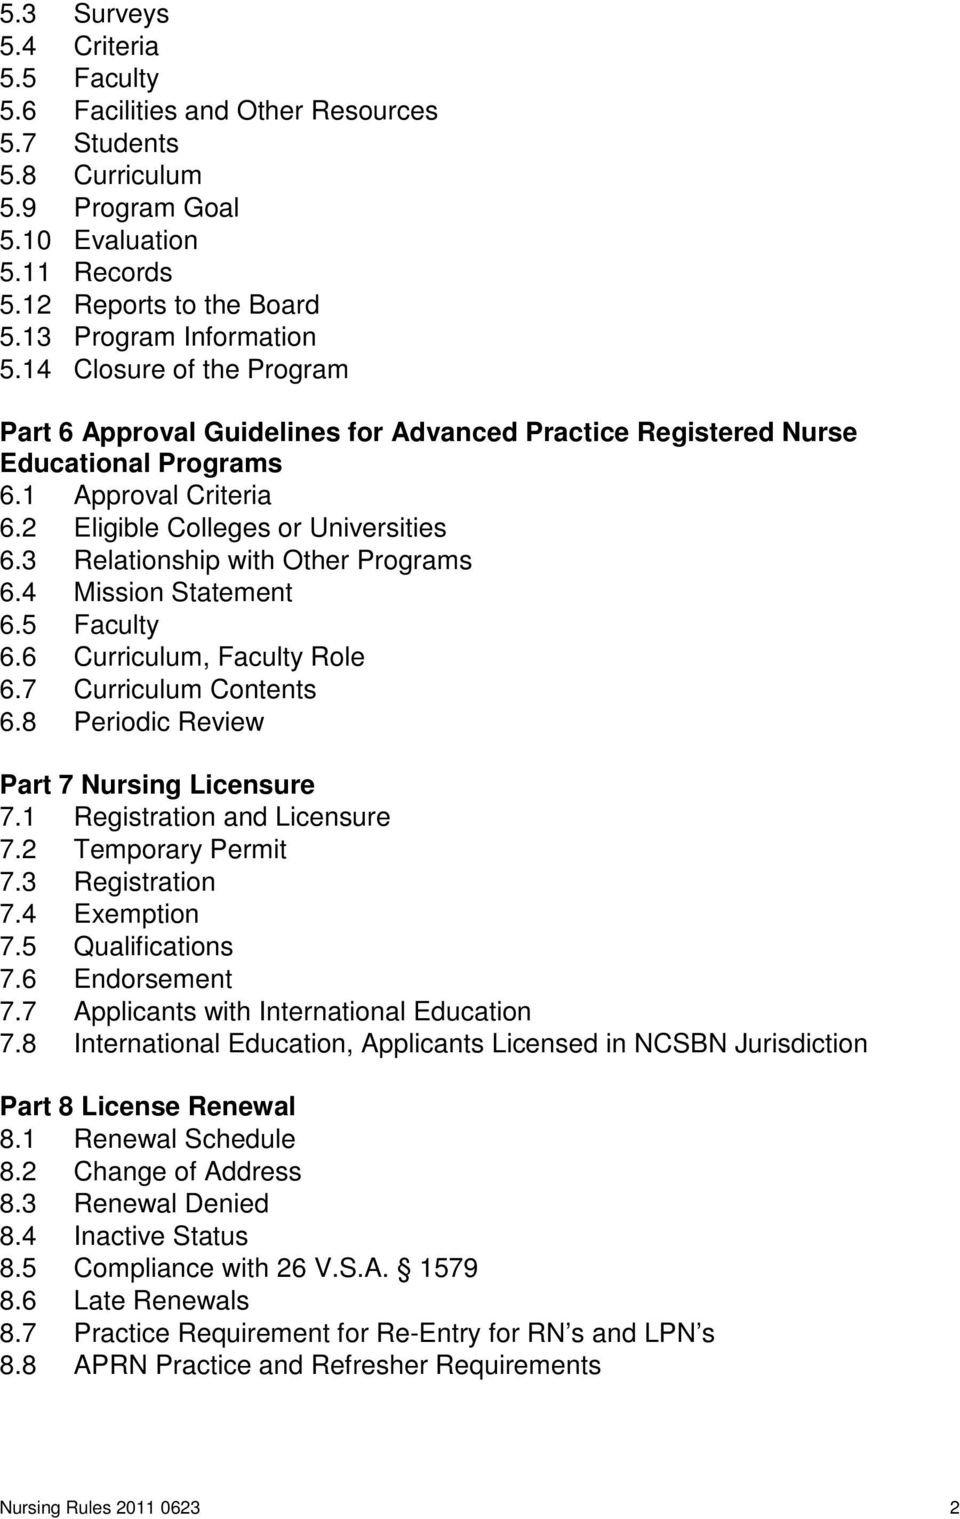 3 Relationship with Other Programs 6.4 Mission Statement 6.5 Faculty 6.6 Curriculum, Faculty Role 6.7 Curriculum Contents 6.8 Periodic Review Part 7 Nursing Licensure 7.1 Registration and Licensure 7.